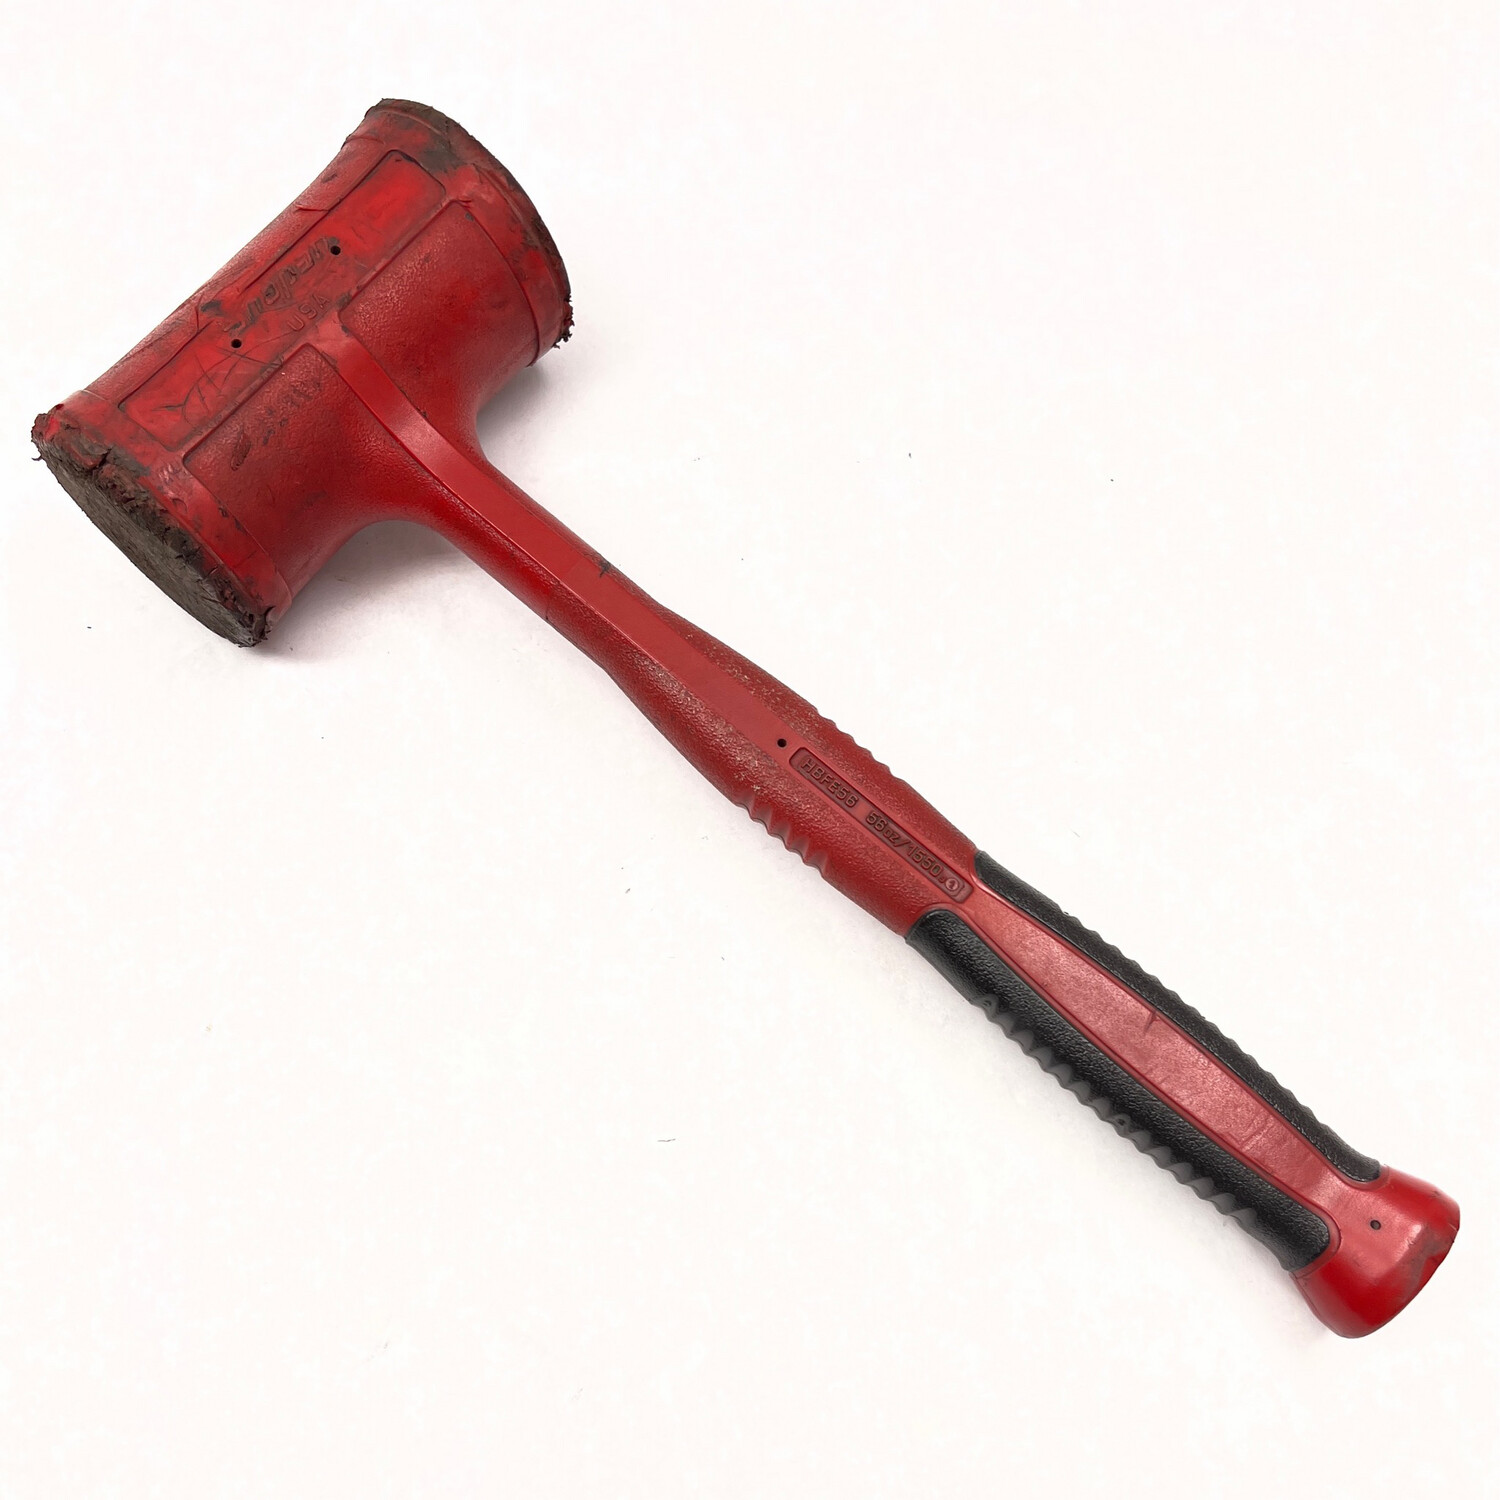 Snap On 56 Oz Soft Grip Dead Blow Hammer, HBFE56